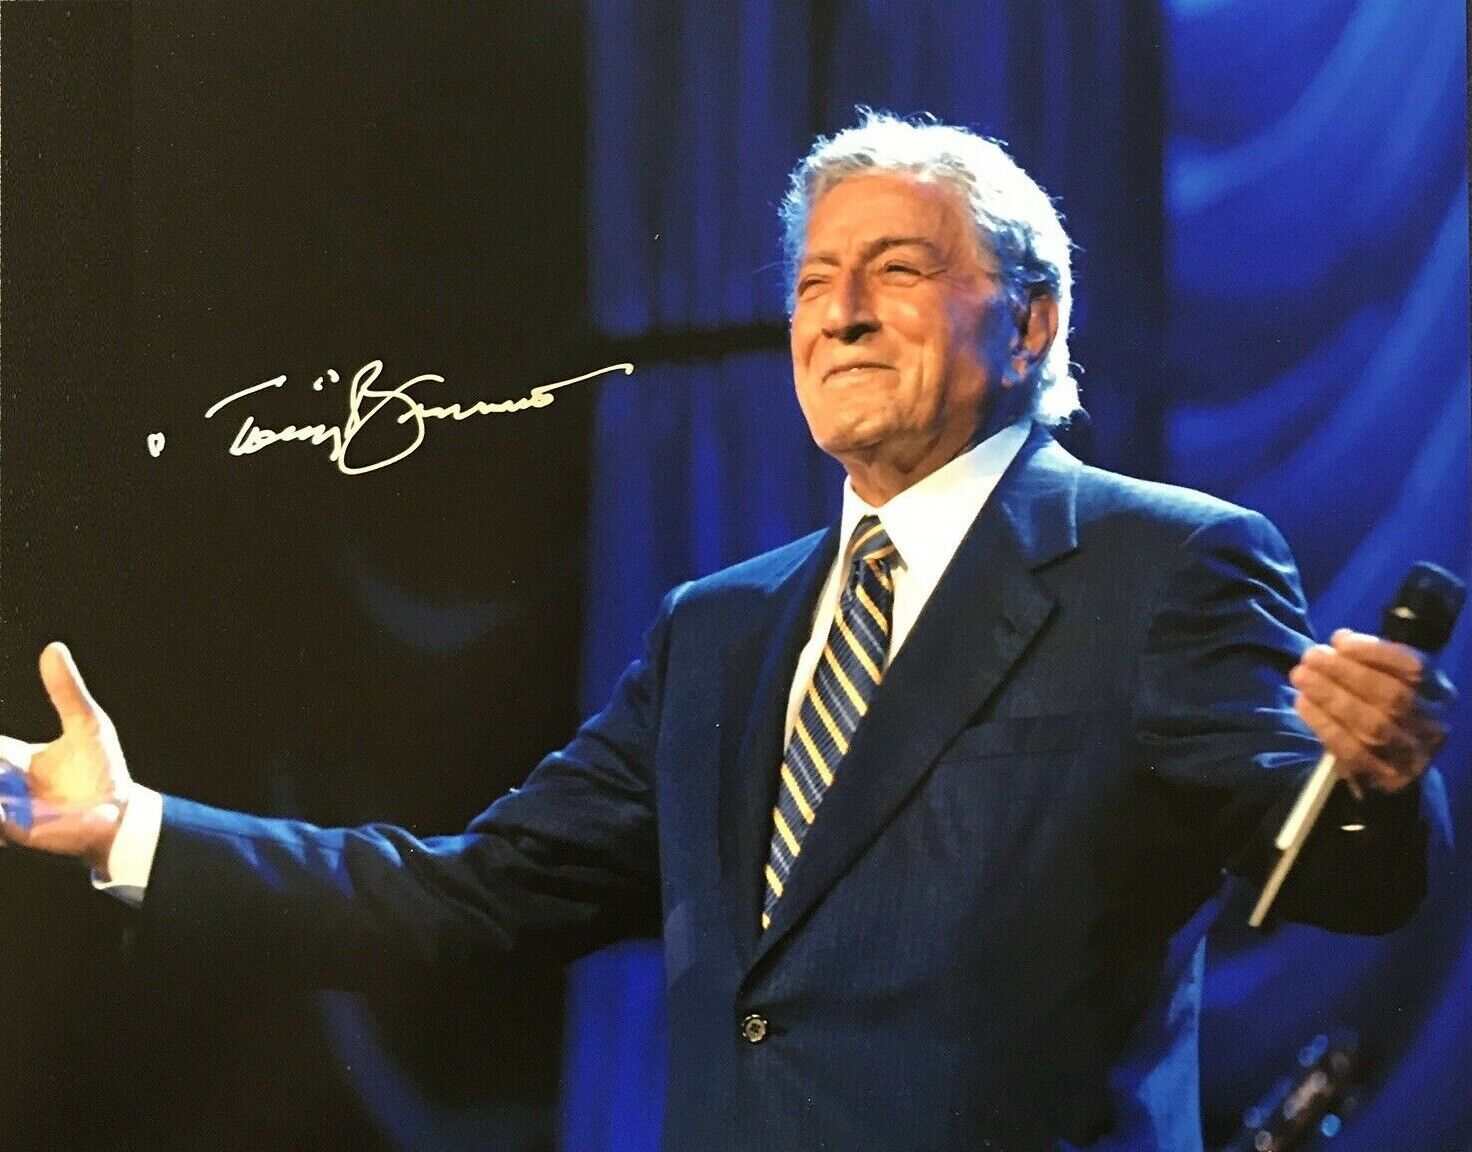 Tony Bennett Autographed Signed 8x10 Photo Poster painting REPRINT